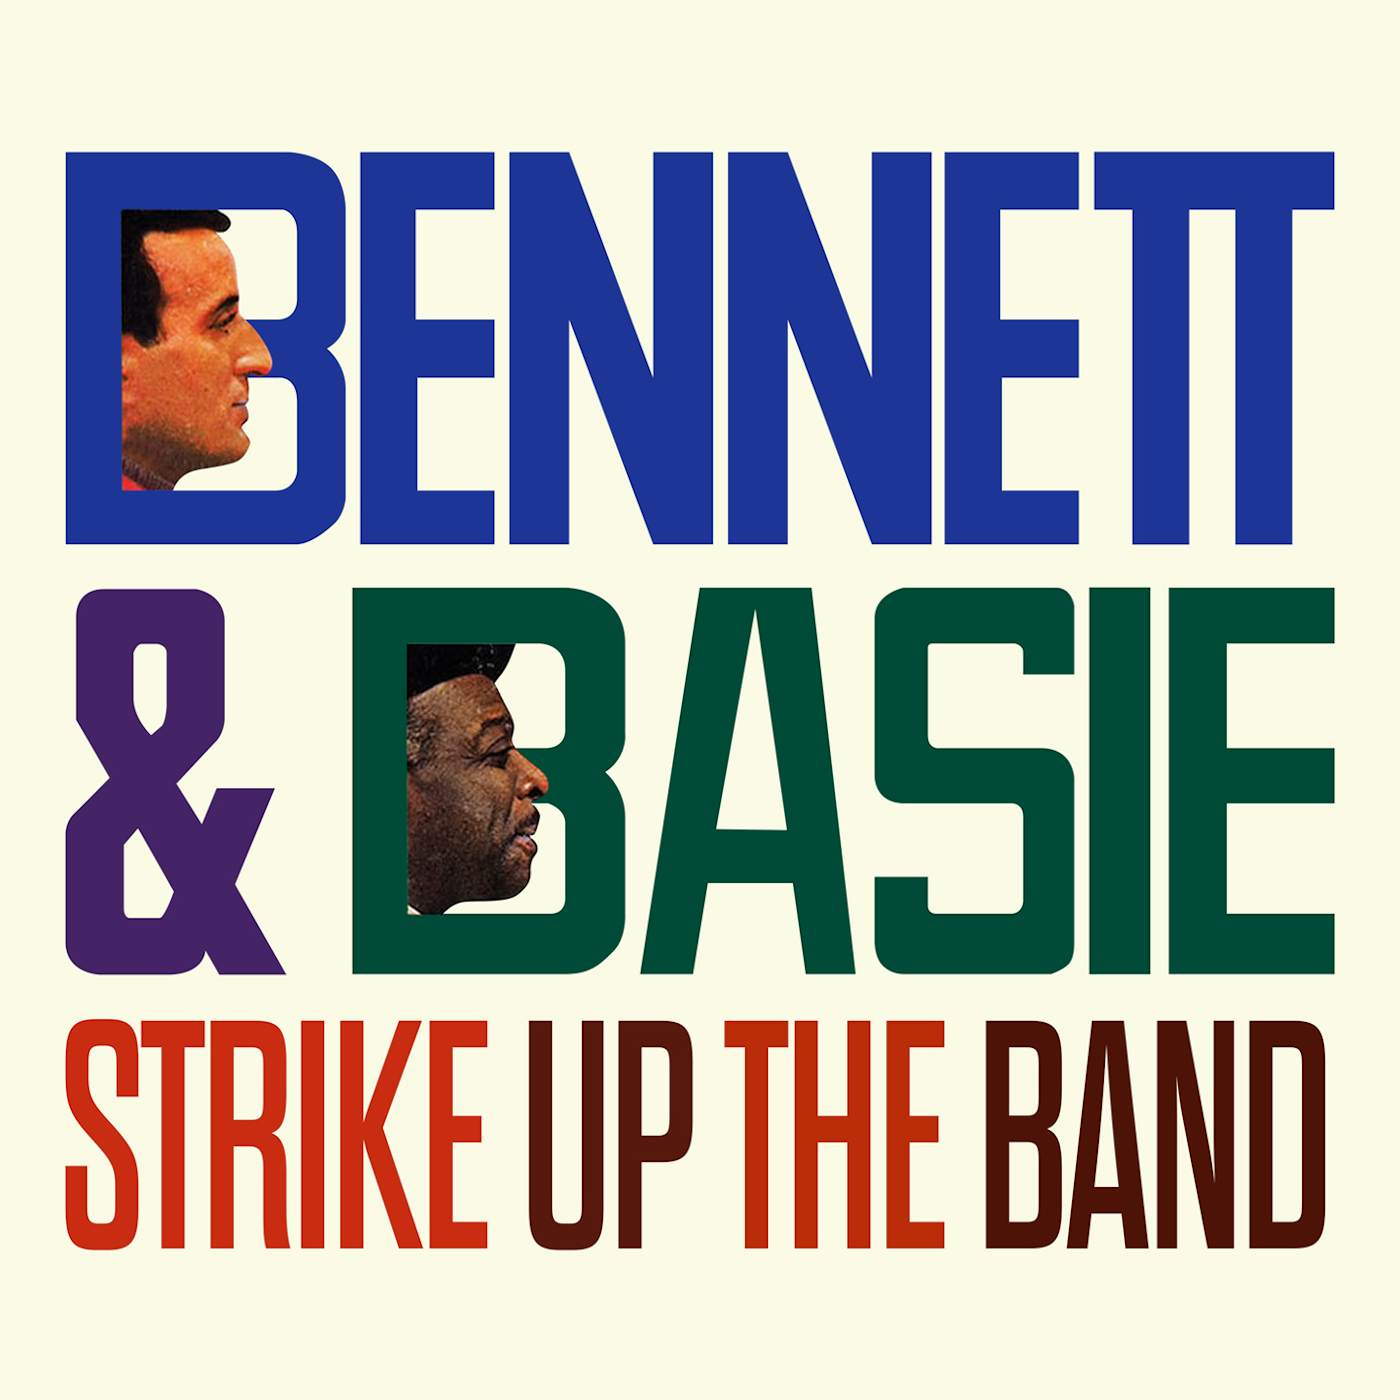 Tony Bennett & The Count Basie Orchestra STRIKE UP THE BAND CD